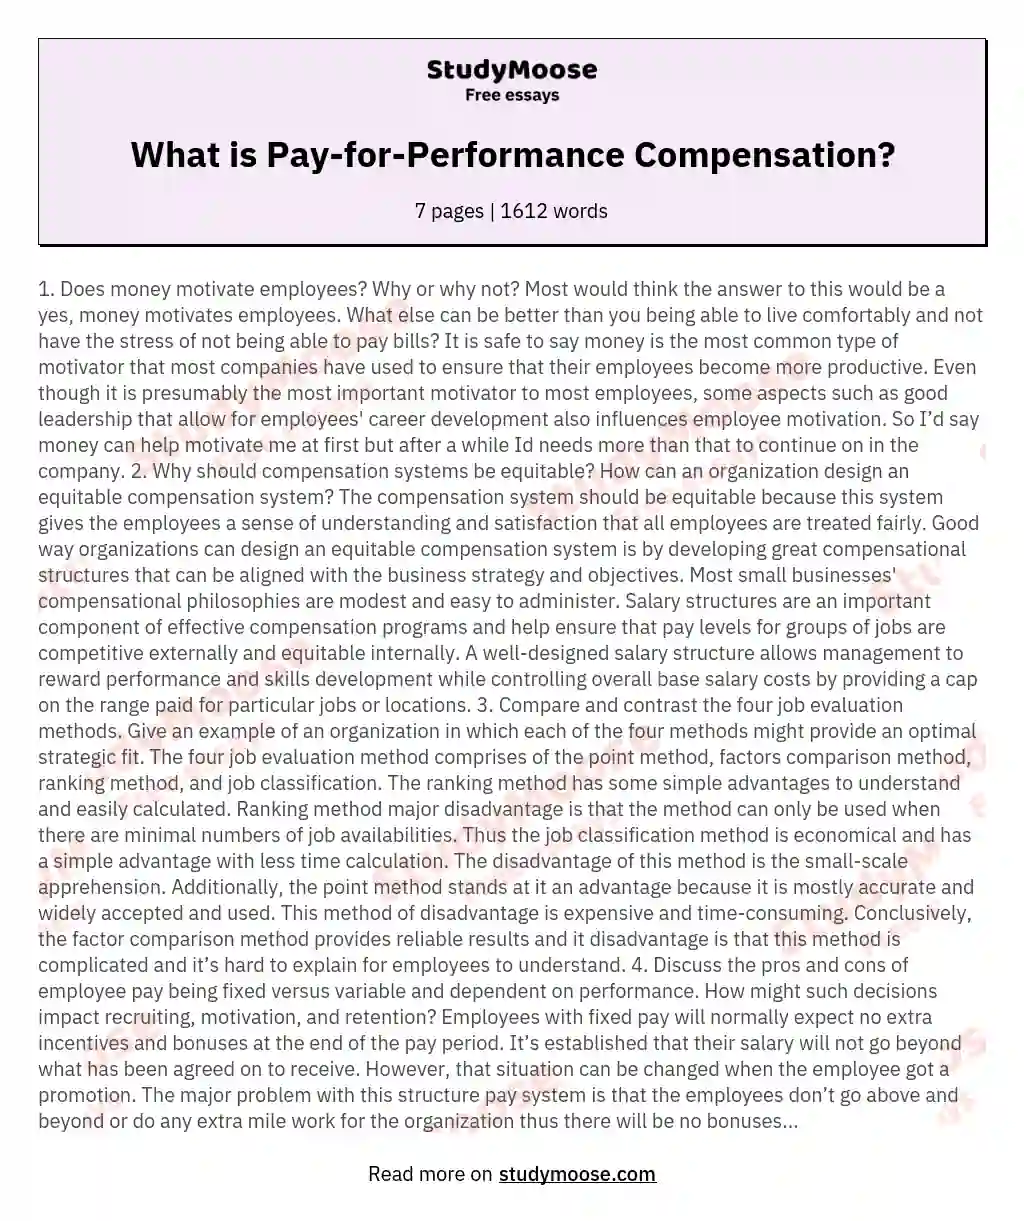 What is Pay-for-Performance Compensation?